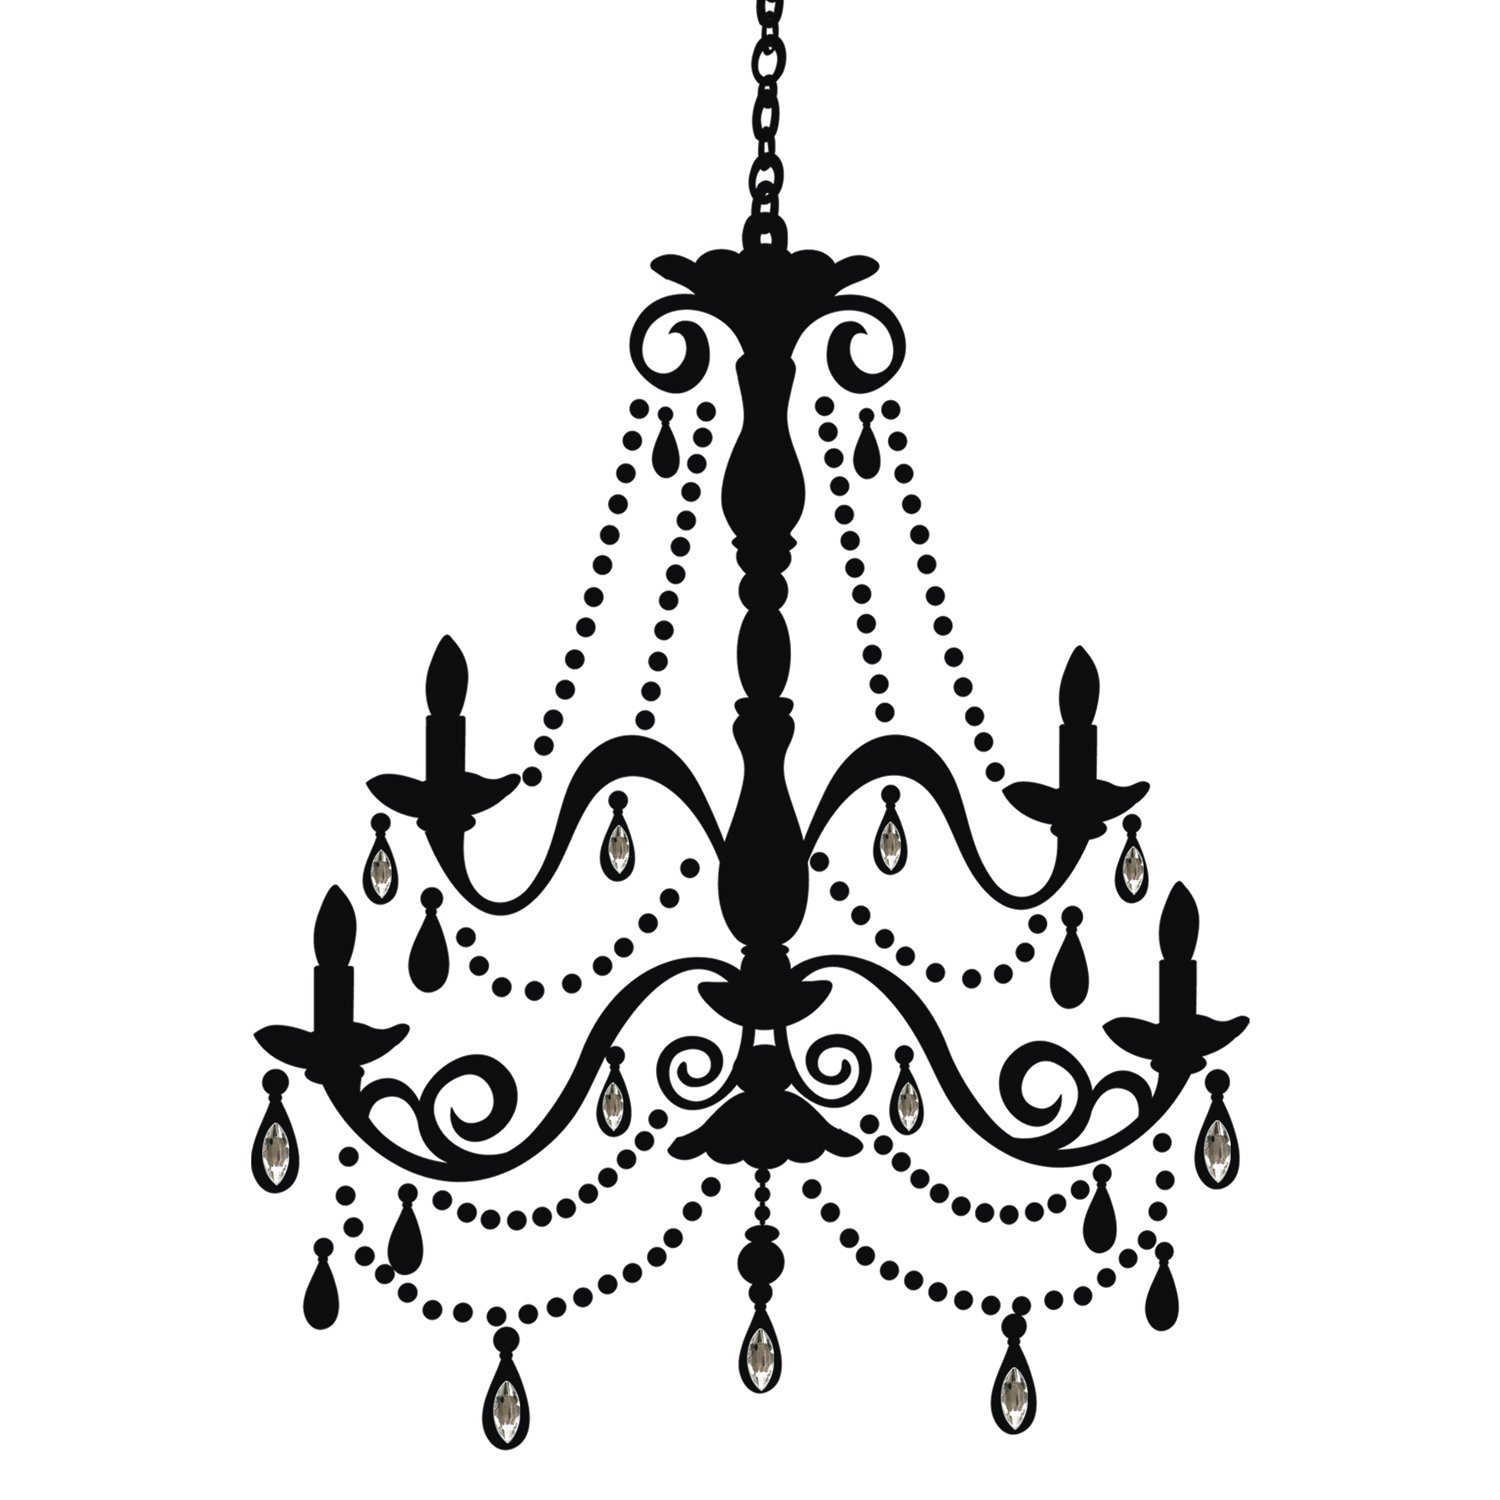 Rmk1805gm Chandelier With Gems Peel And Stick Giant Wall Decal New